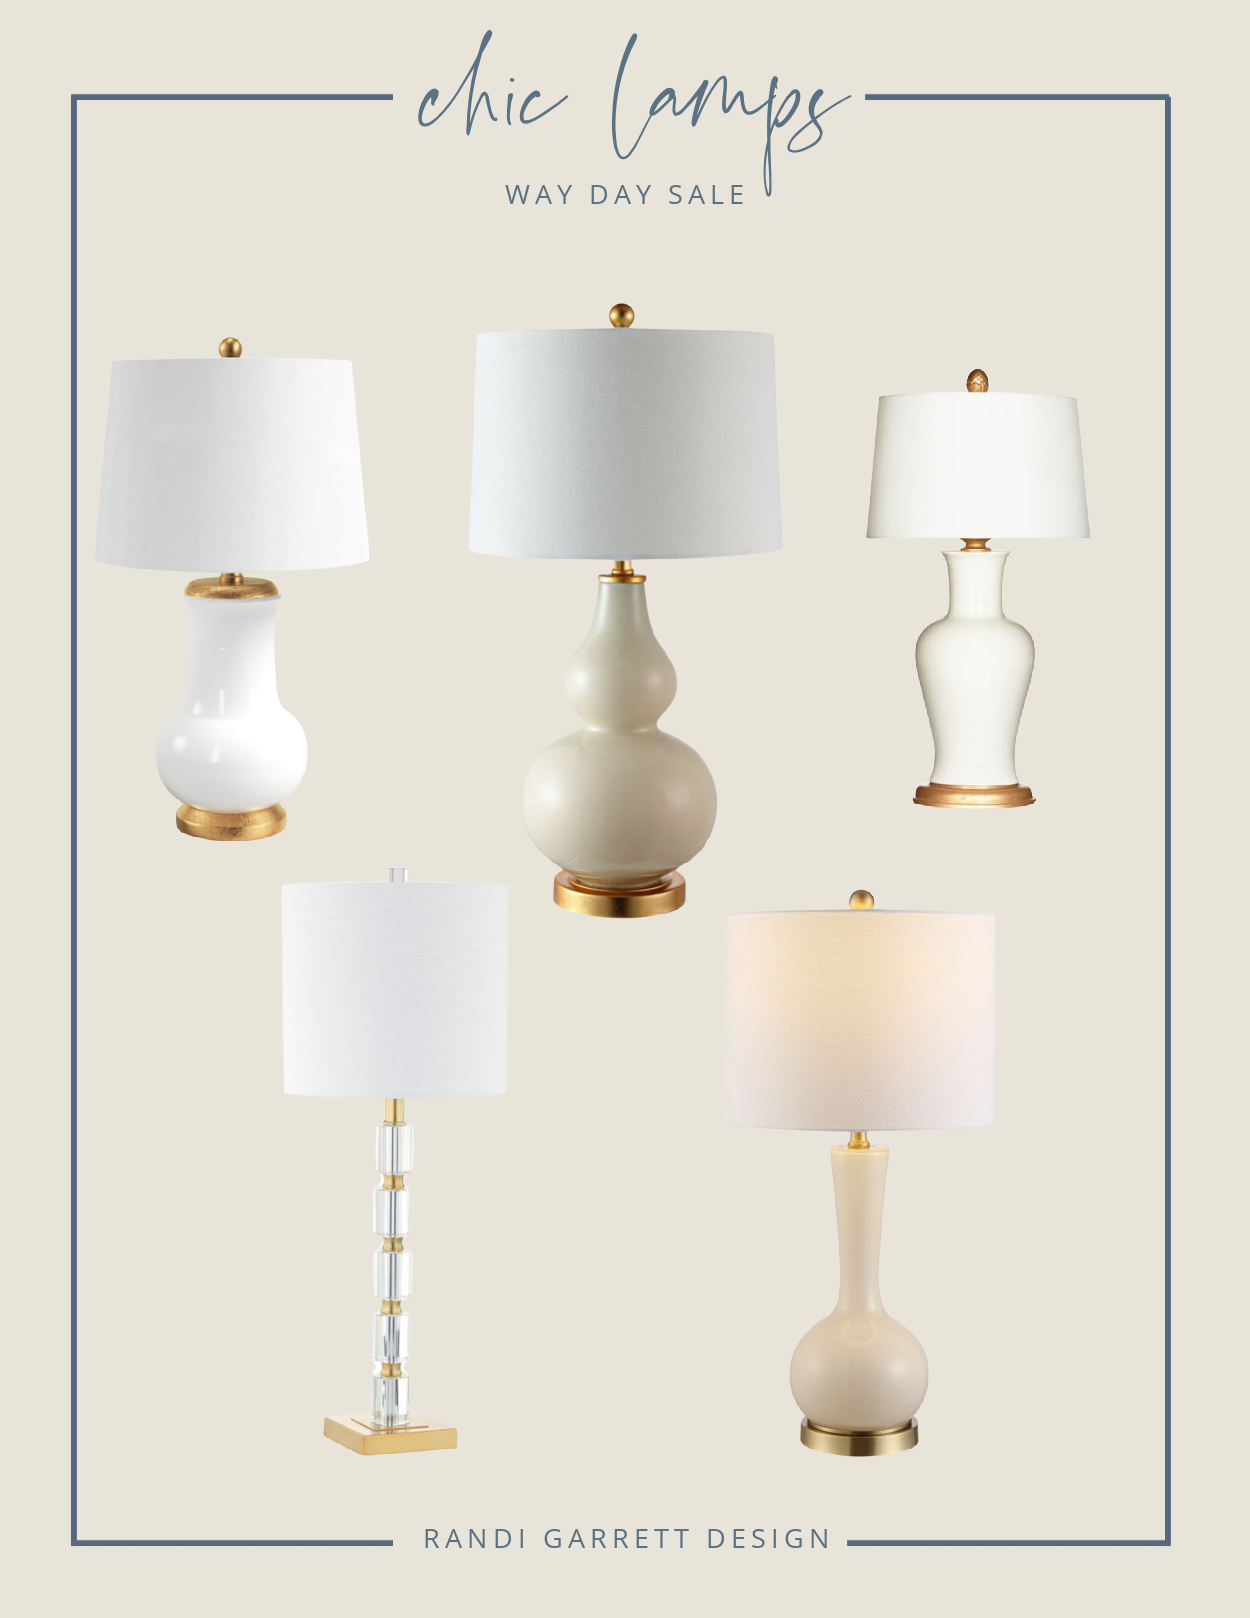 Way Day Sale - Your Favs + My Look for Less - lamps